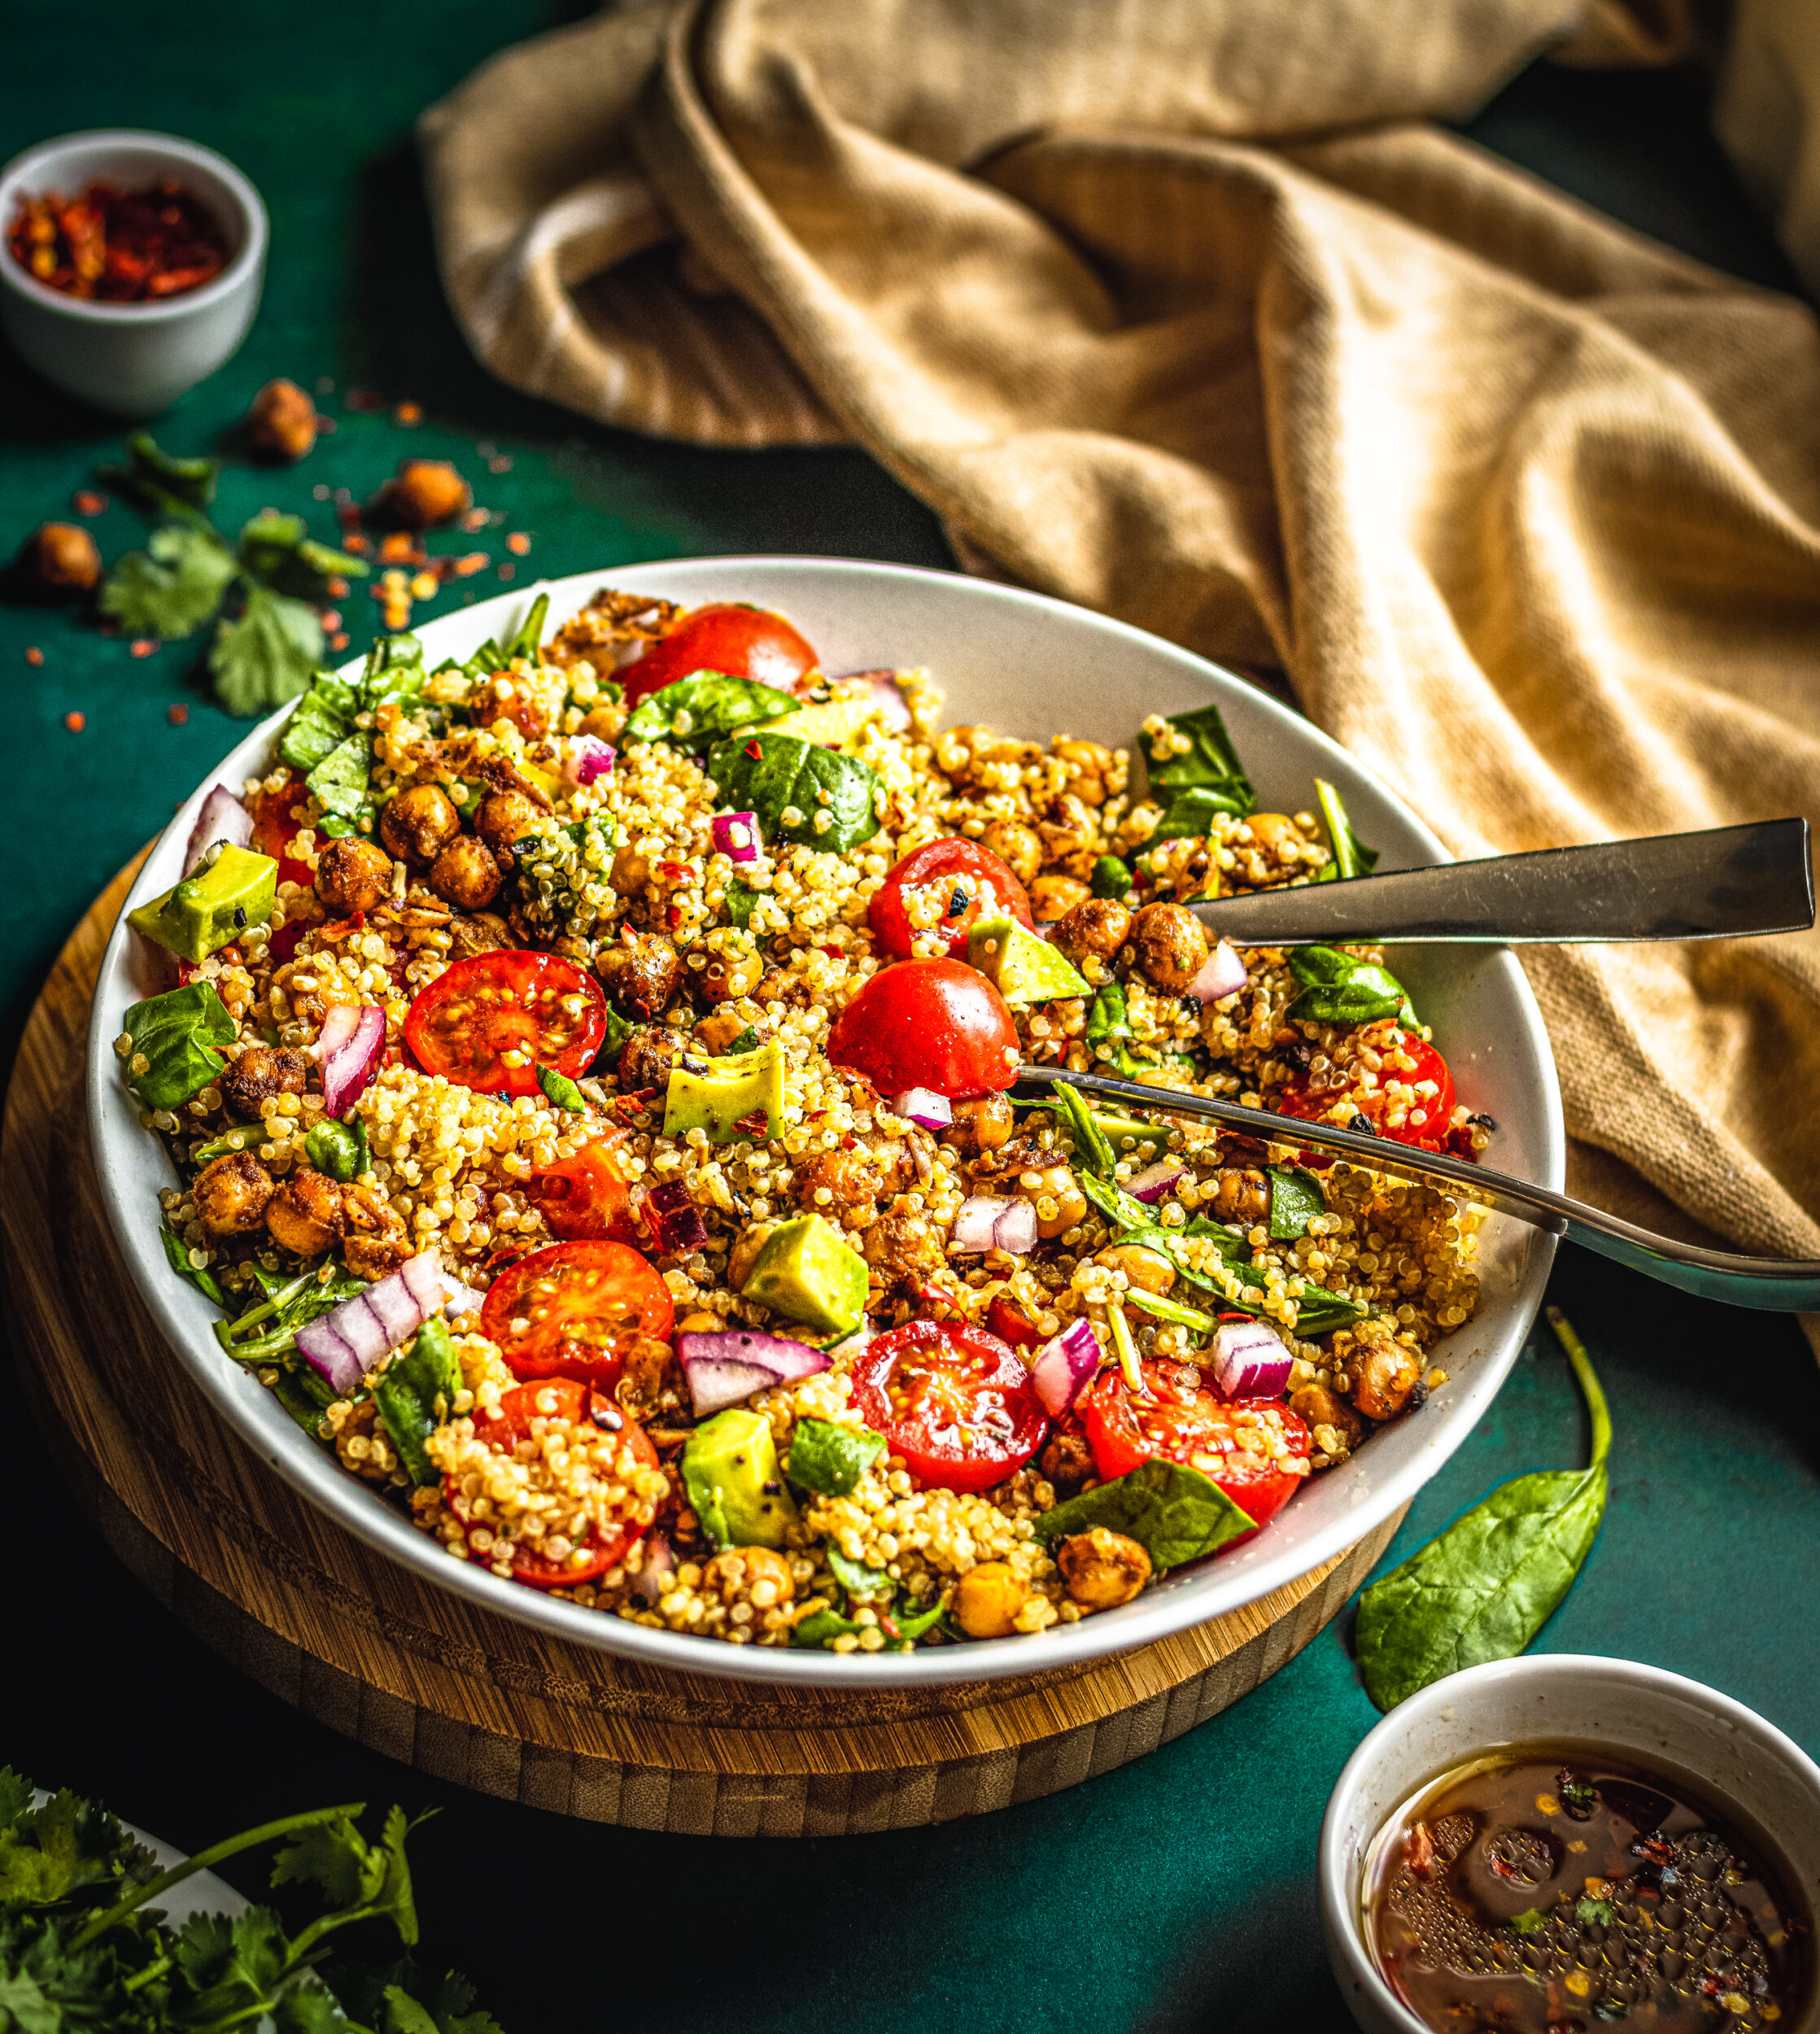 Quinoa and chickpea-Salad served with lemon dressing.